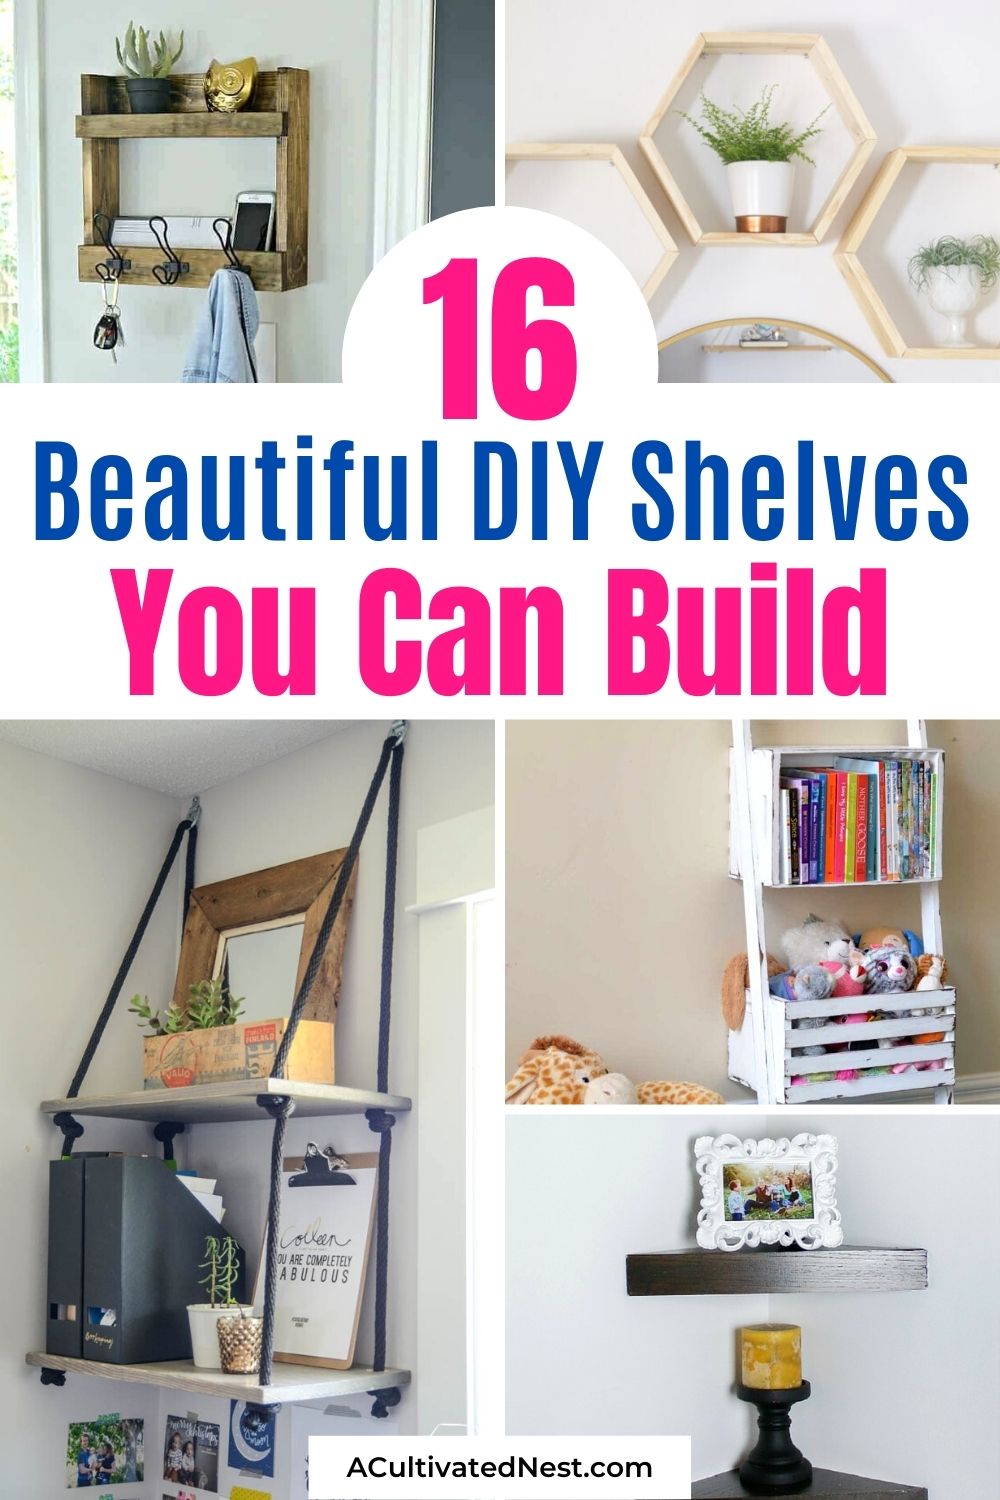 16 DIY Shelves to Get You Organized- You can get your home organized in a stylish and frugal way with these beautiful DIY shelves! | #homeOrganization #organizing #diyProjects #DIY #ACultivatedNest